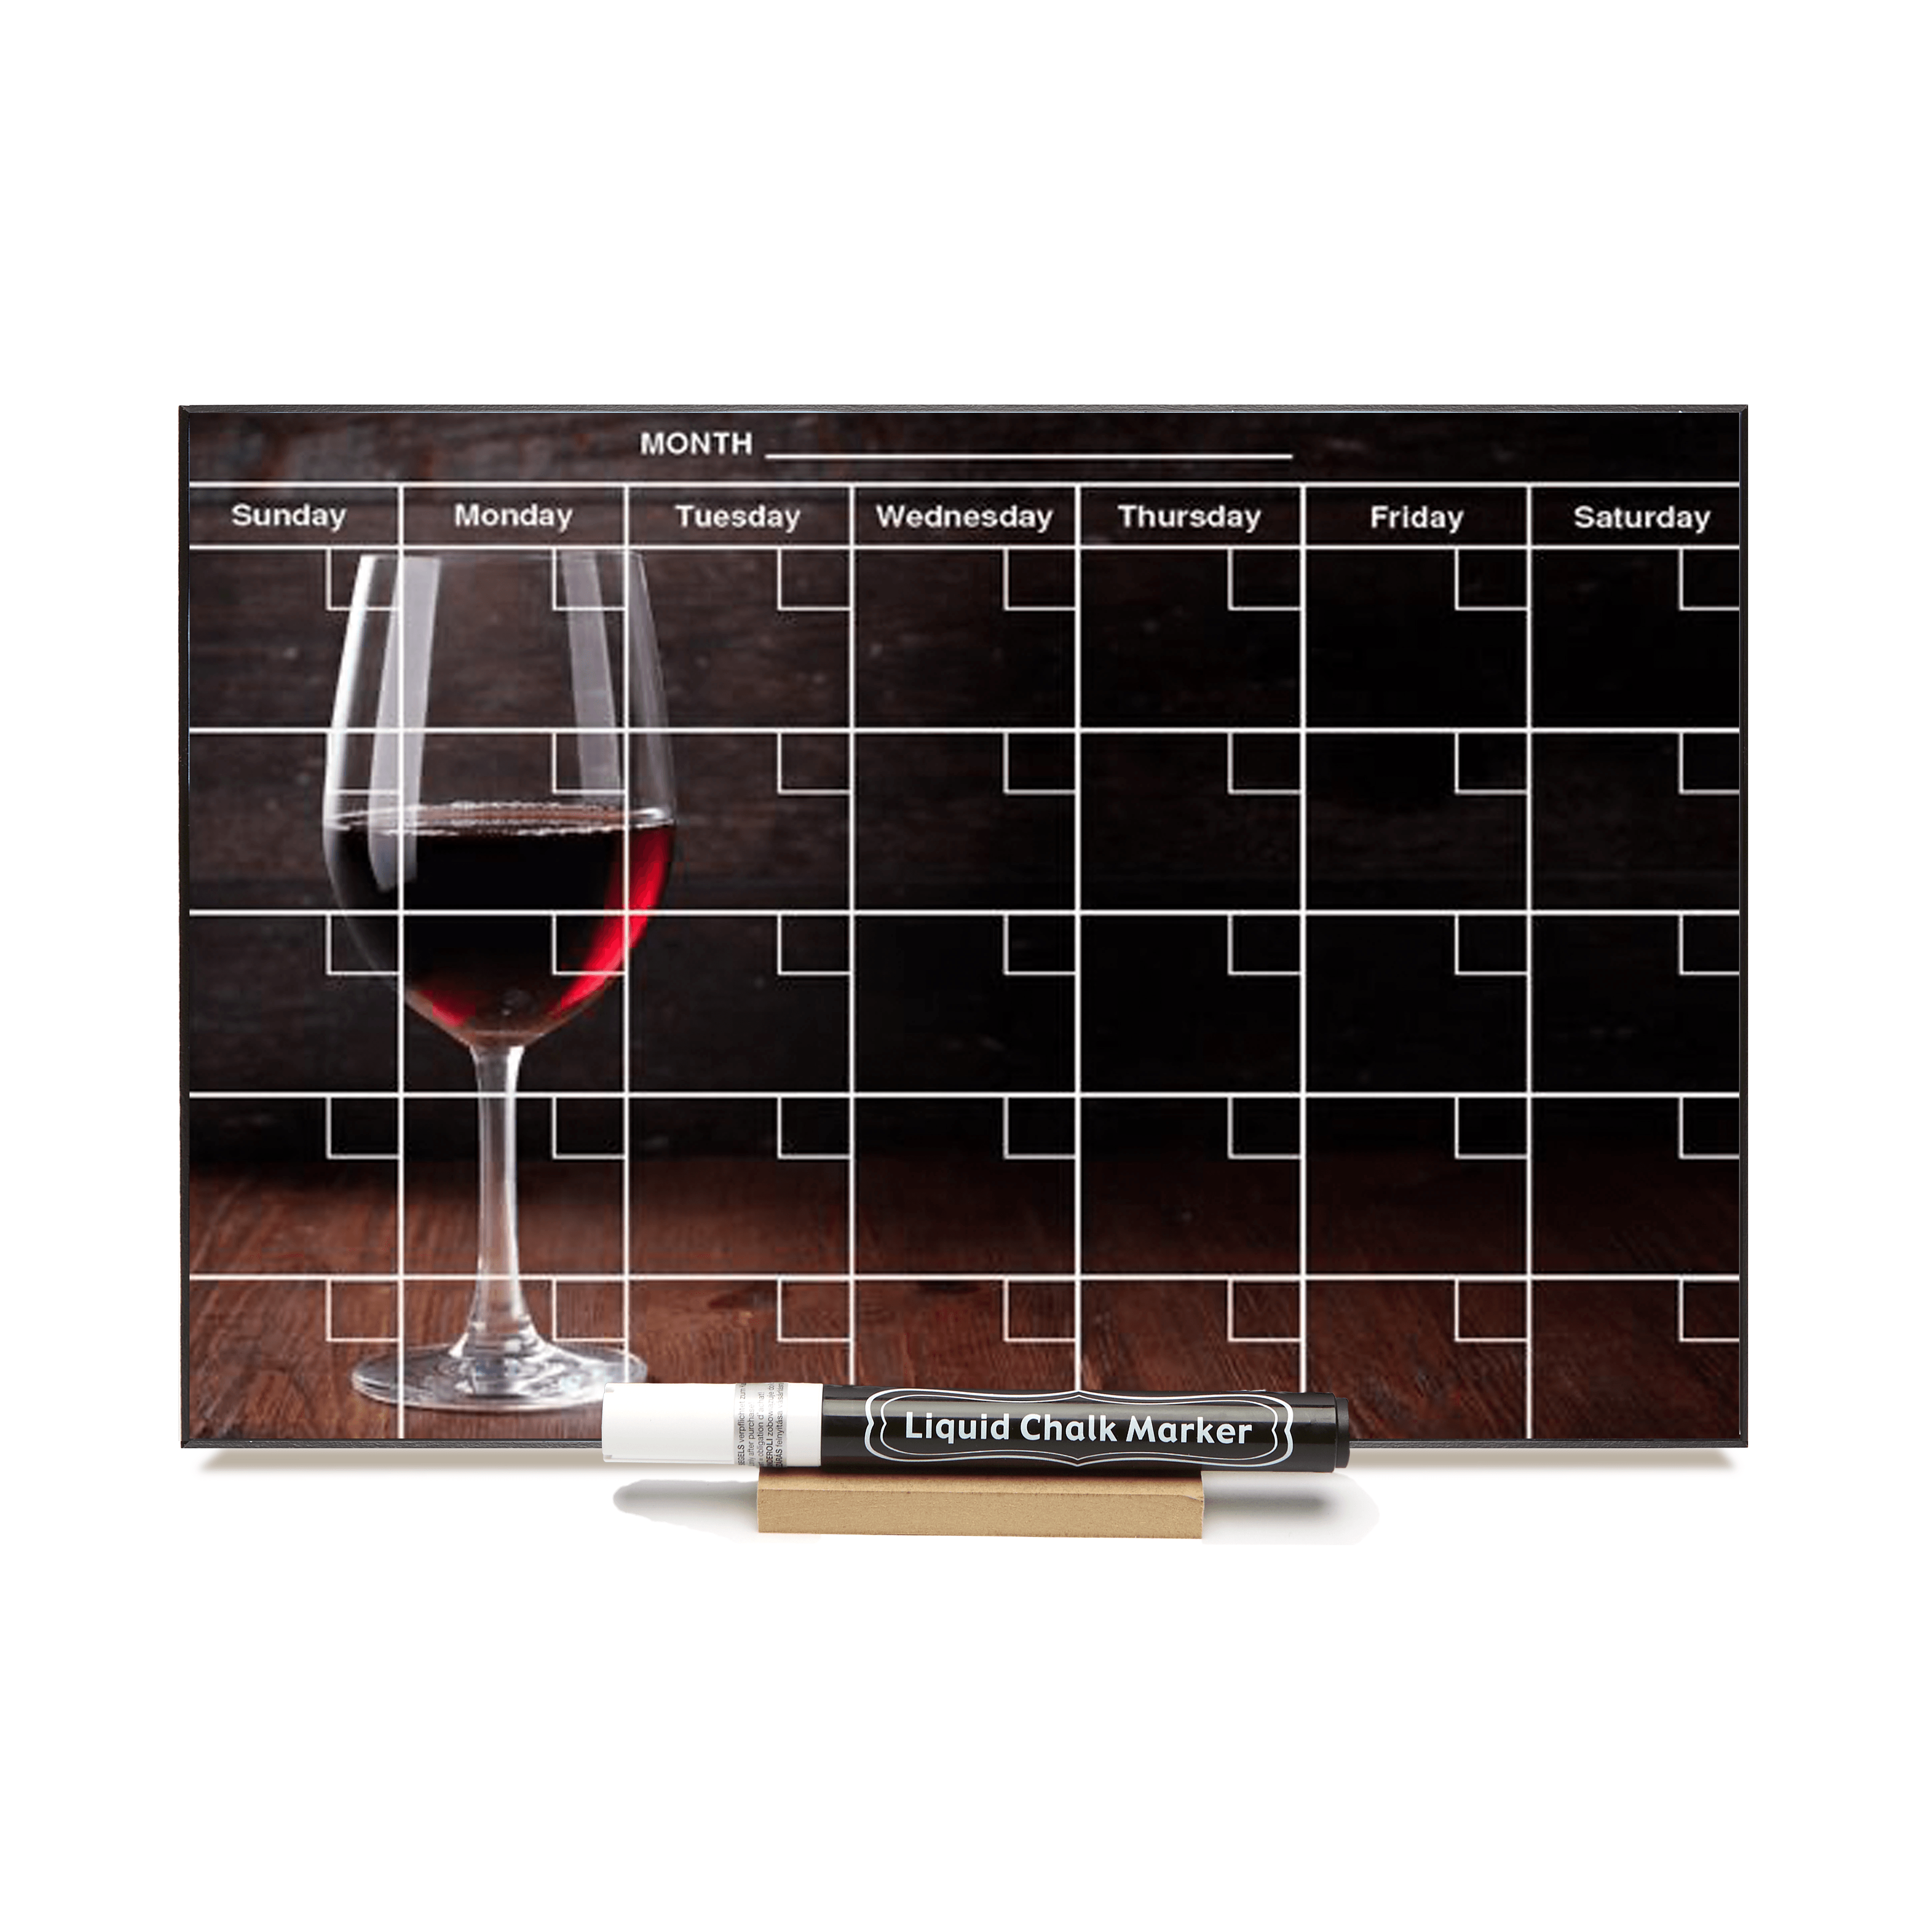 "Red Wine Glass" Calendar PHOTO CHALKBOARD Includes Chalkboard, Chalk Marker and Stand